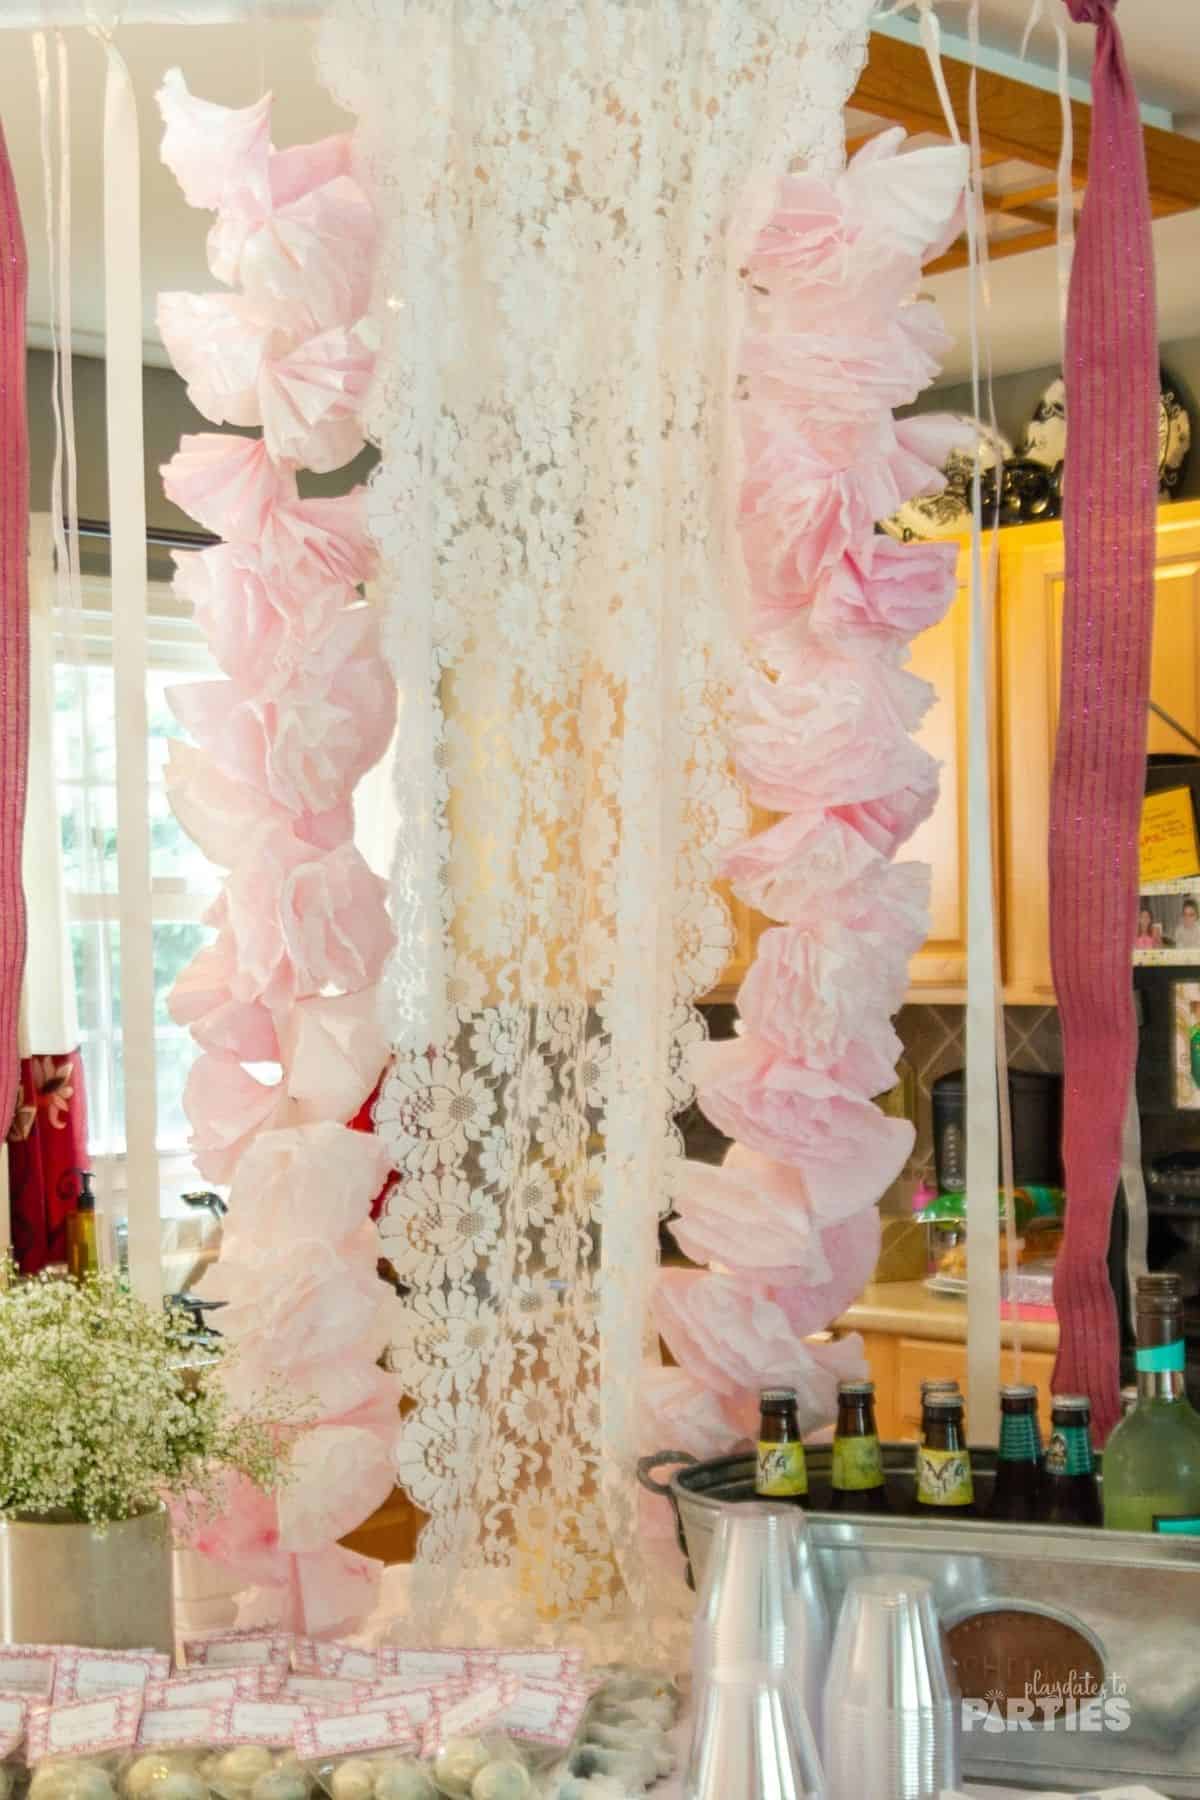 Ping coffee filter garlands, pink lace, and ribbons hanging over a dessert table for a baptism.